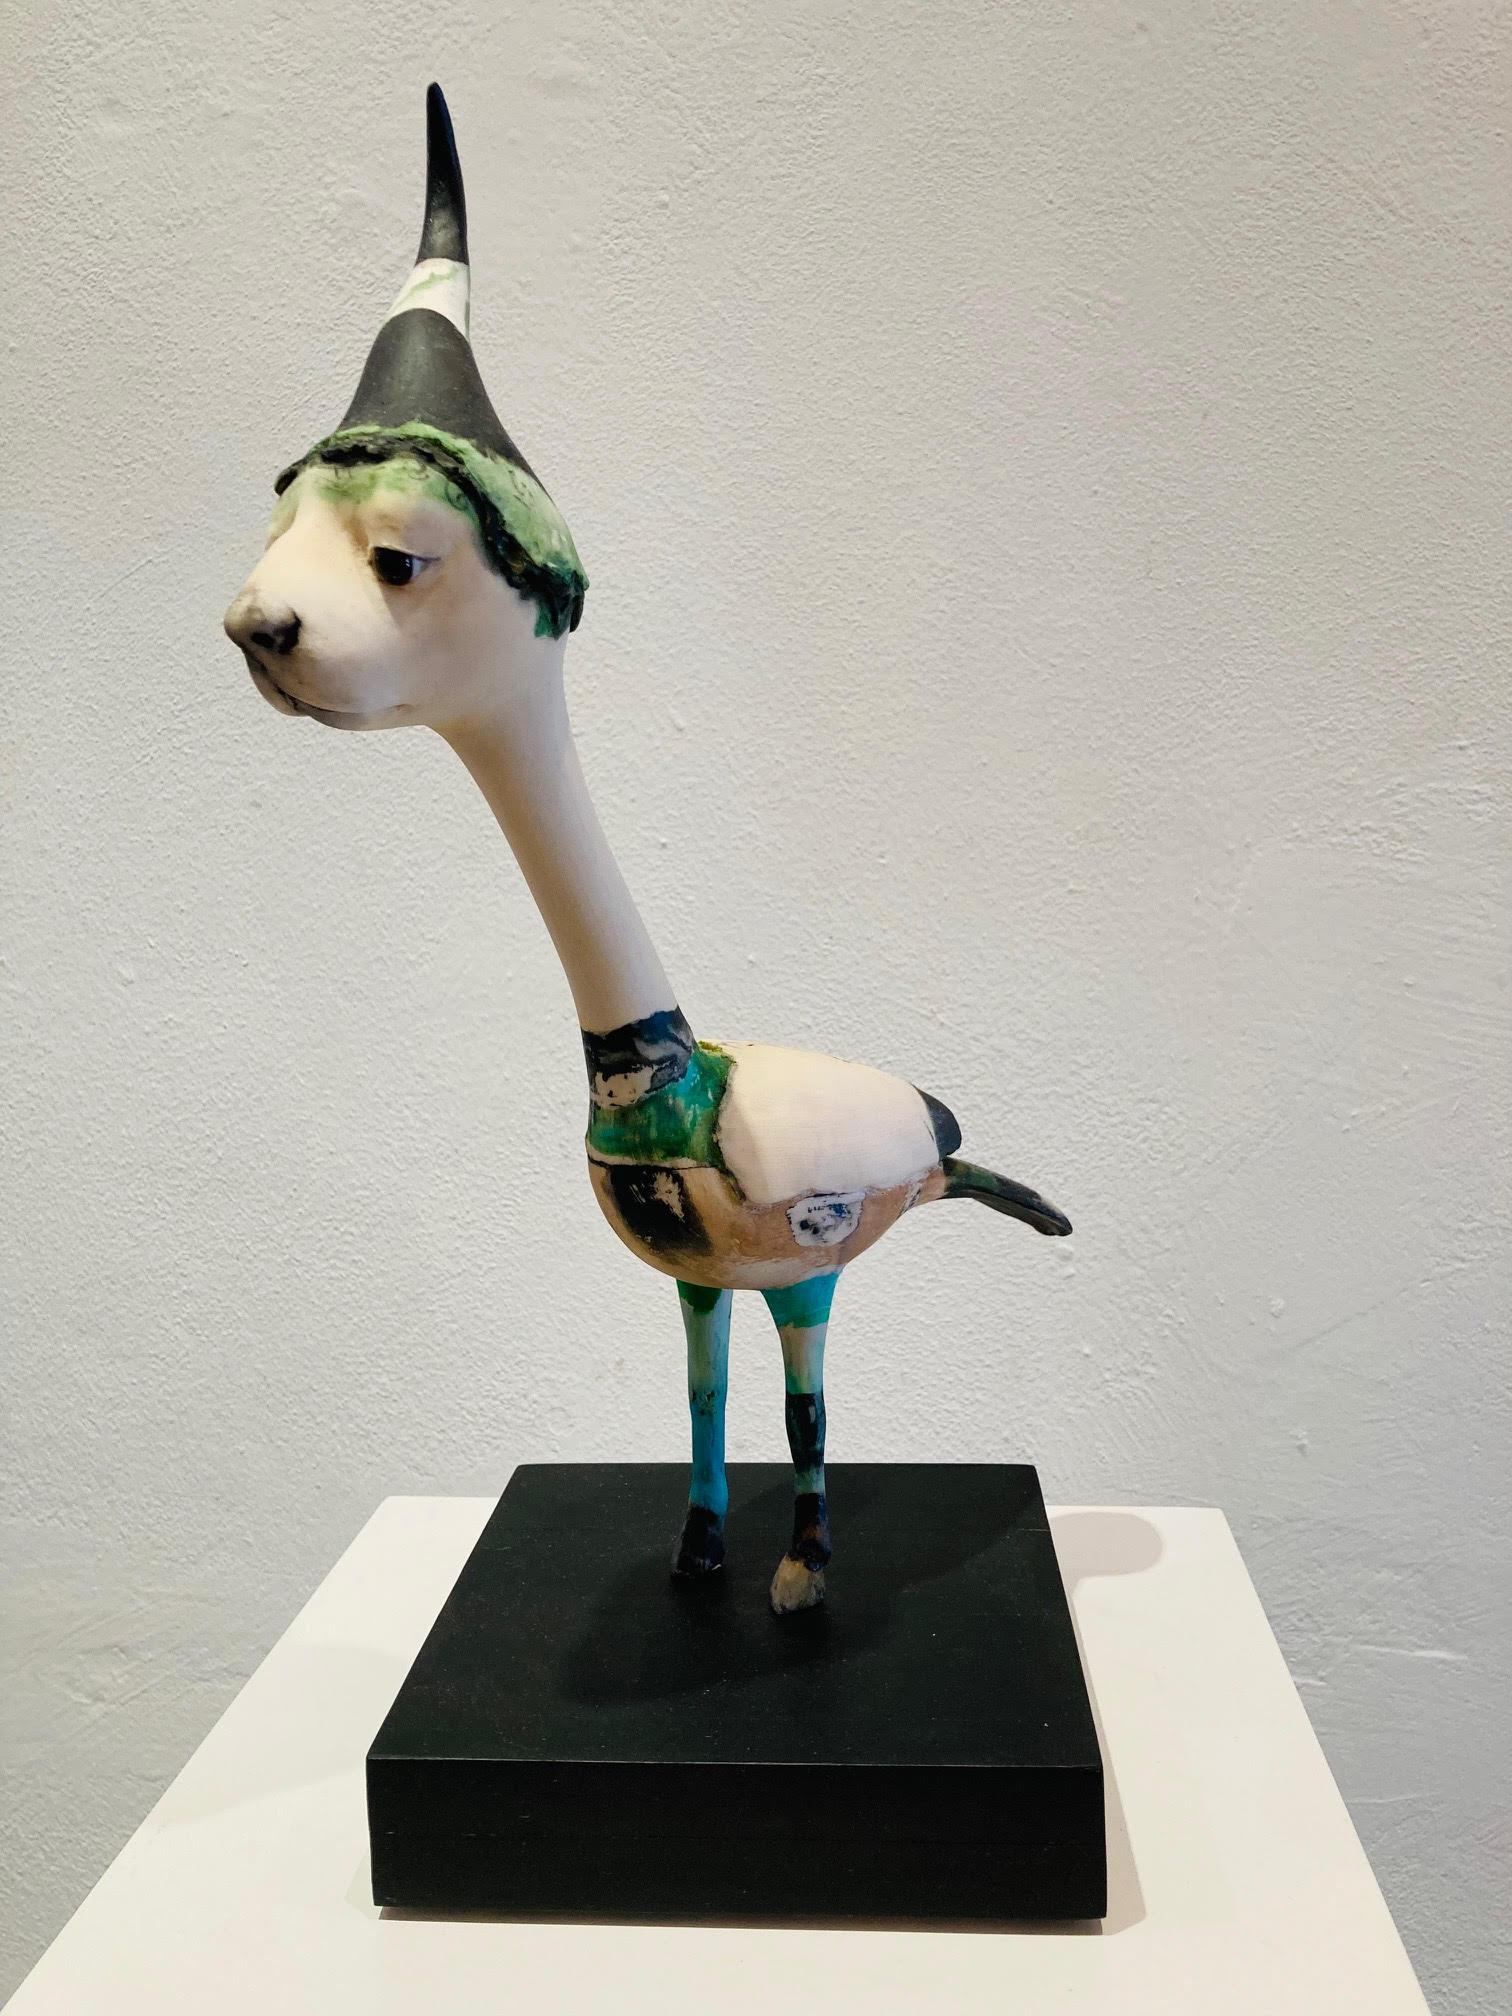 Koud Cold Sculpture Mixed Media Contemporary Colourful Surreal Fantasy In Stock

Corjan Nodelijk is a composer and a professional storyteller. The quirky and surreal creatures - mostly people or animals - seem curious. But it is ultimately up to the